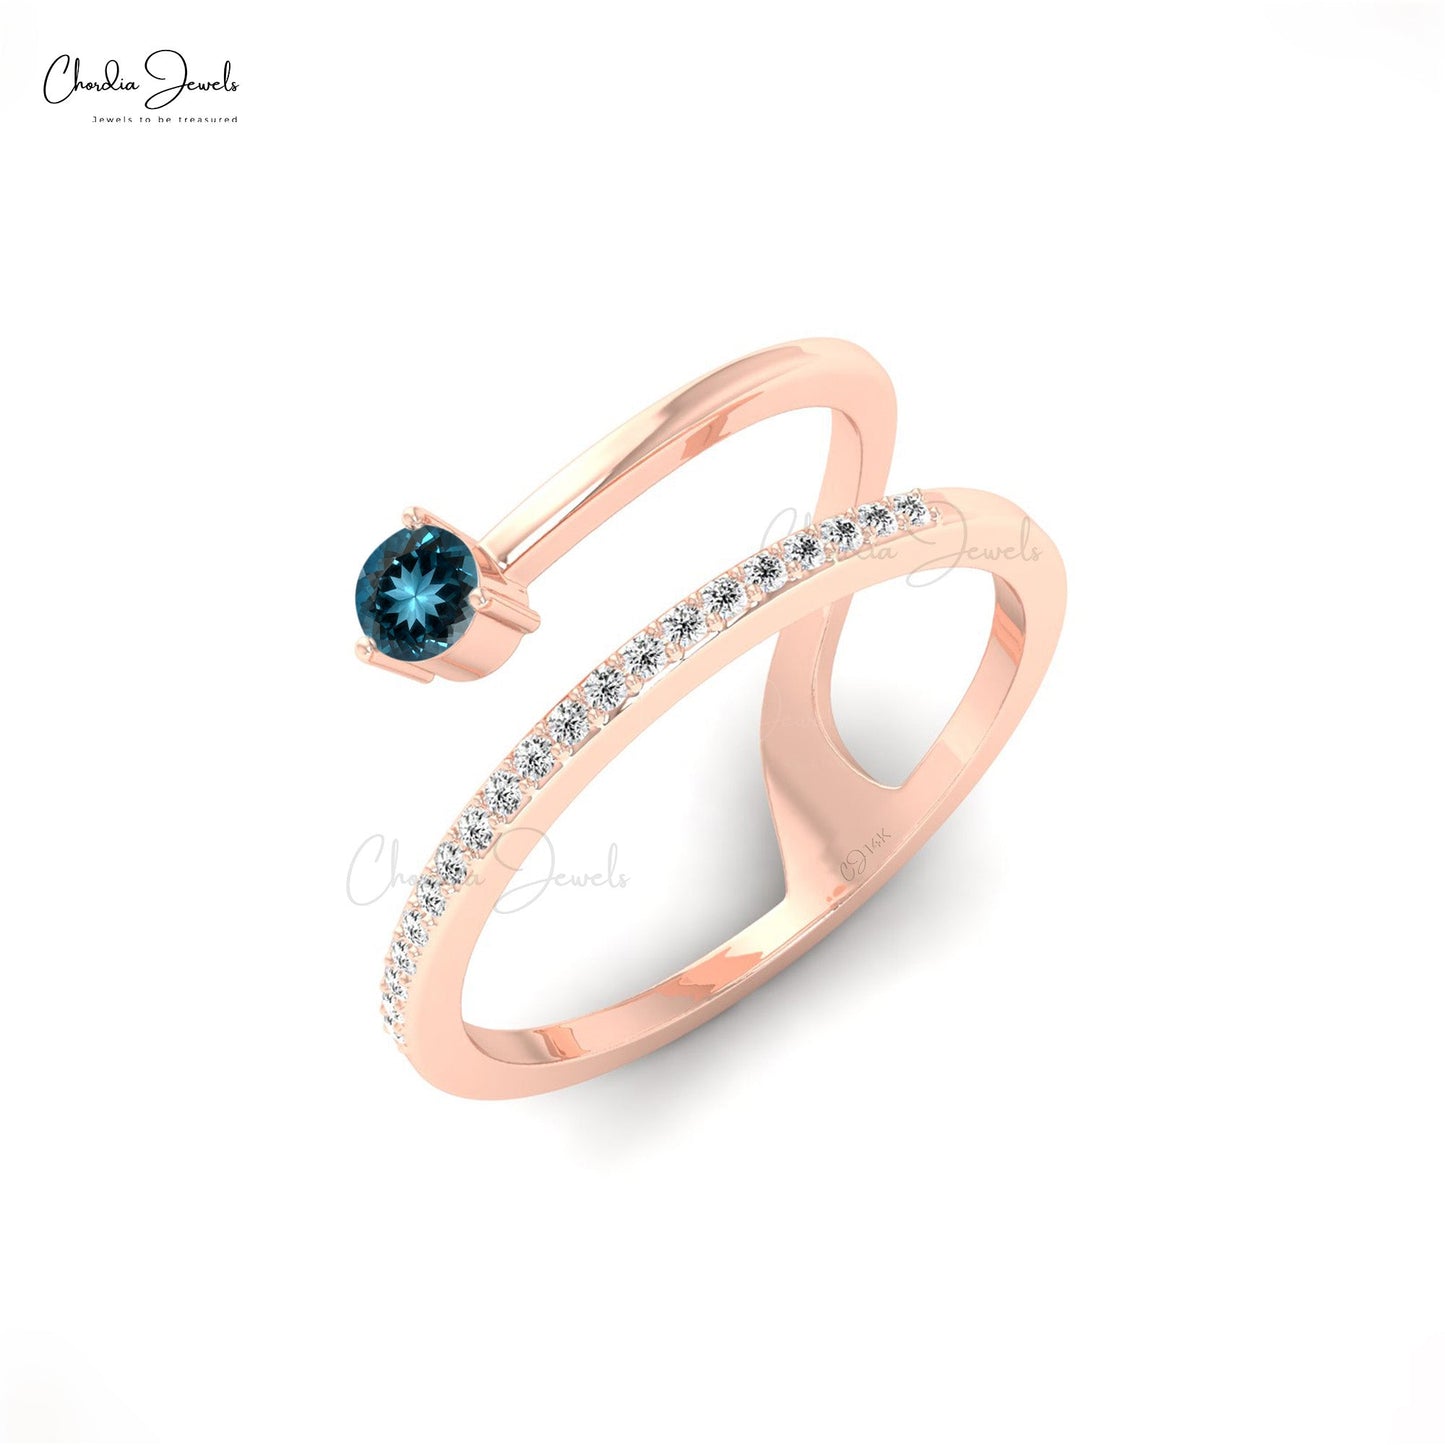 Buy quality 18k Rose gold Diamond modern daily wear Ring in Ahmedabad